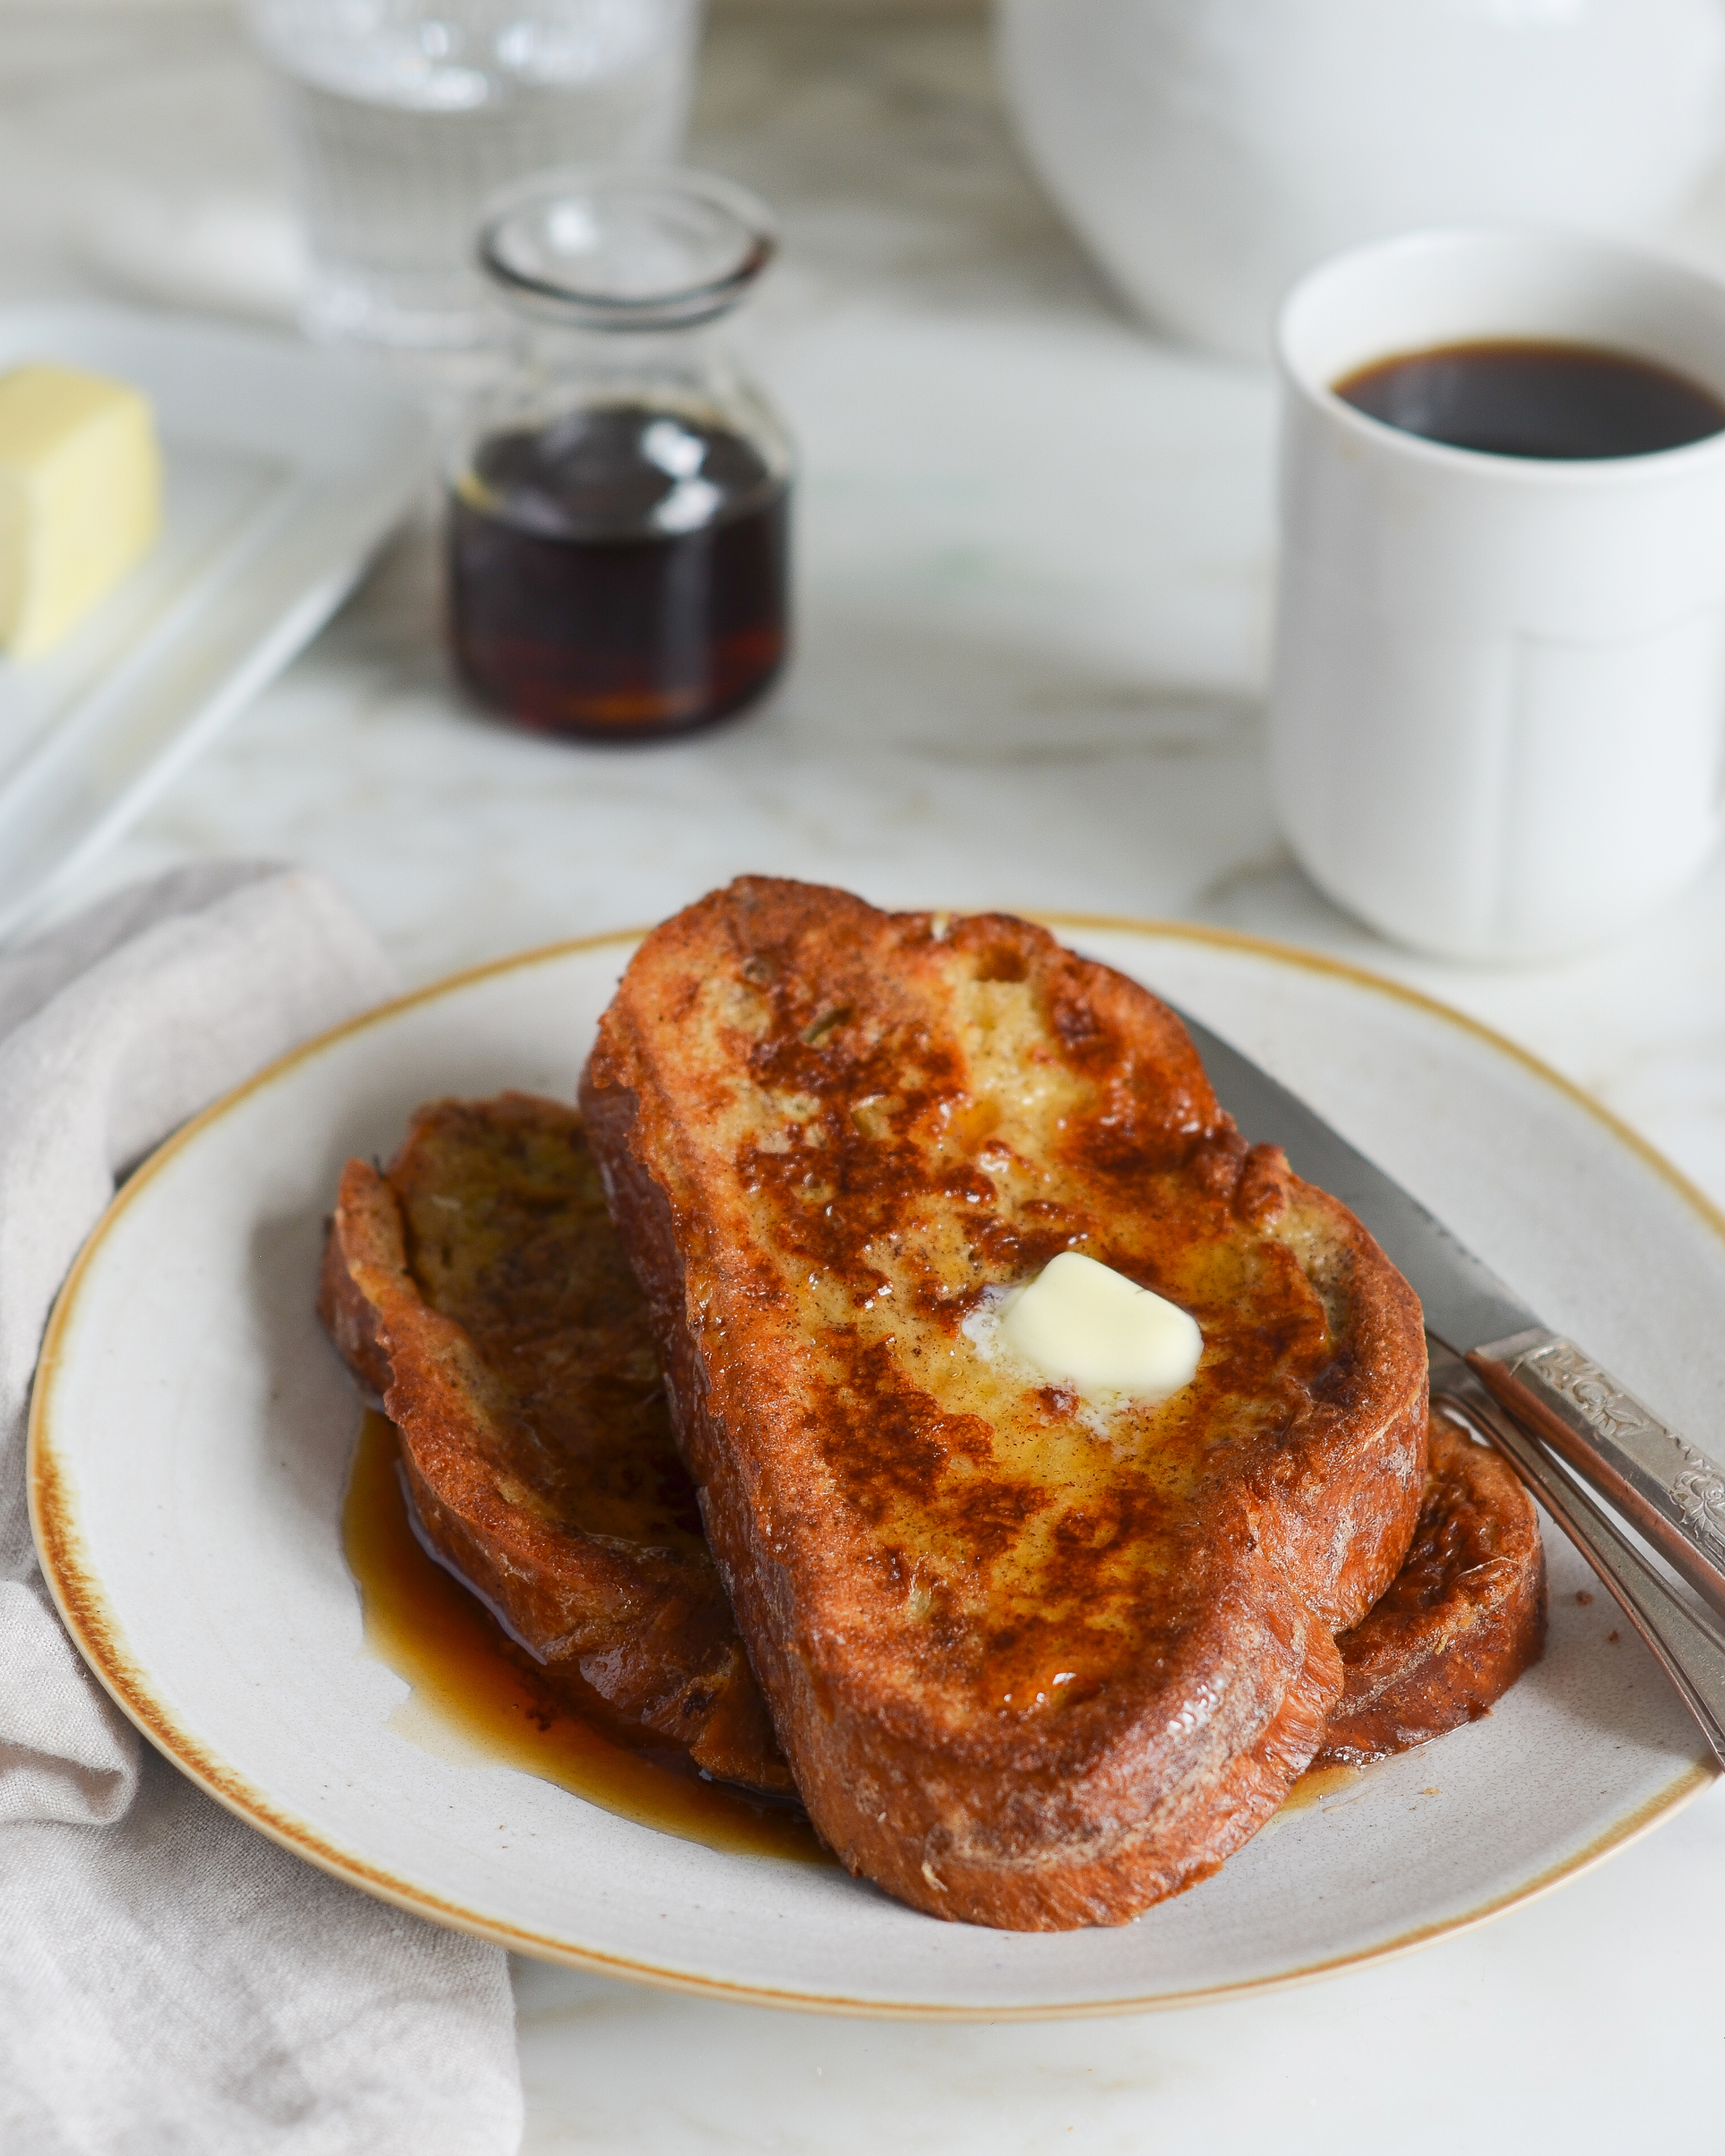 Challah French Toast For A Special Occasion Once Upon A Chef